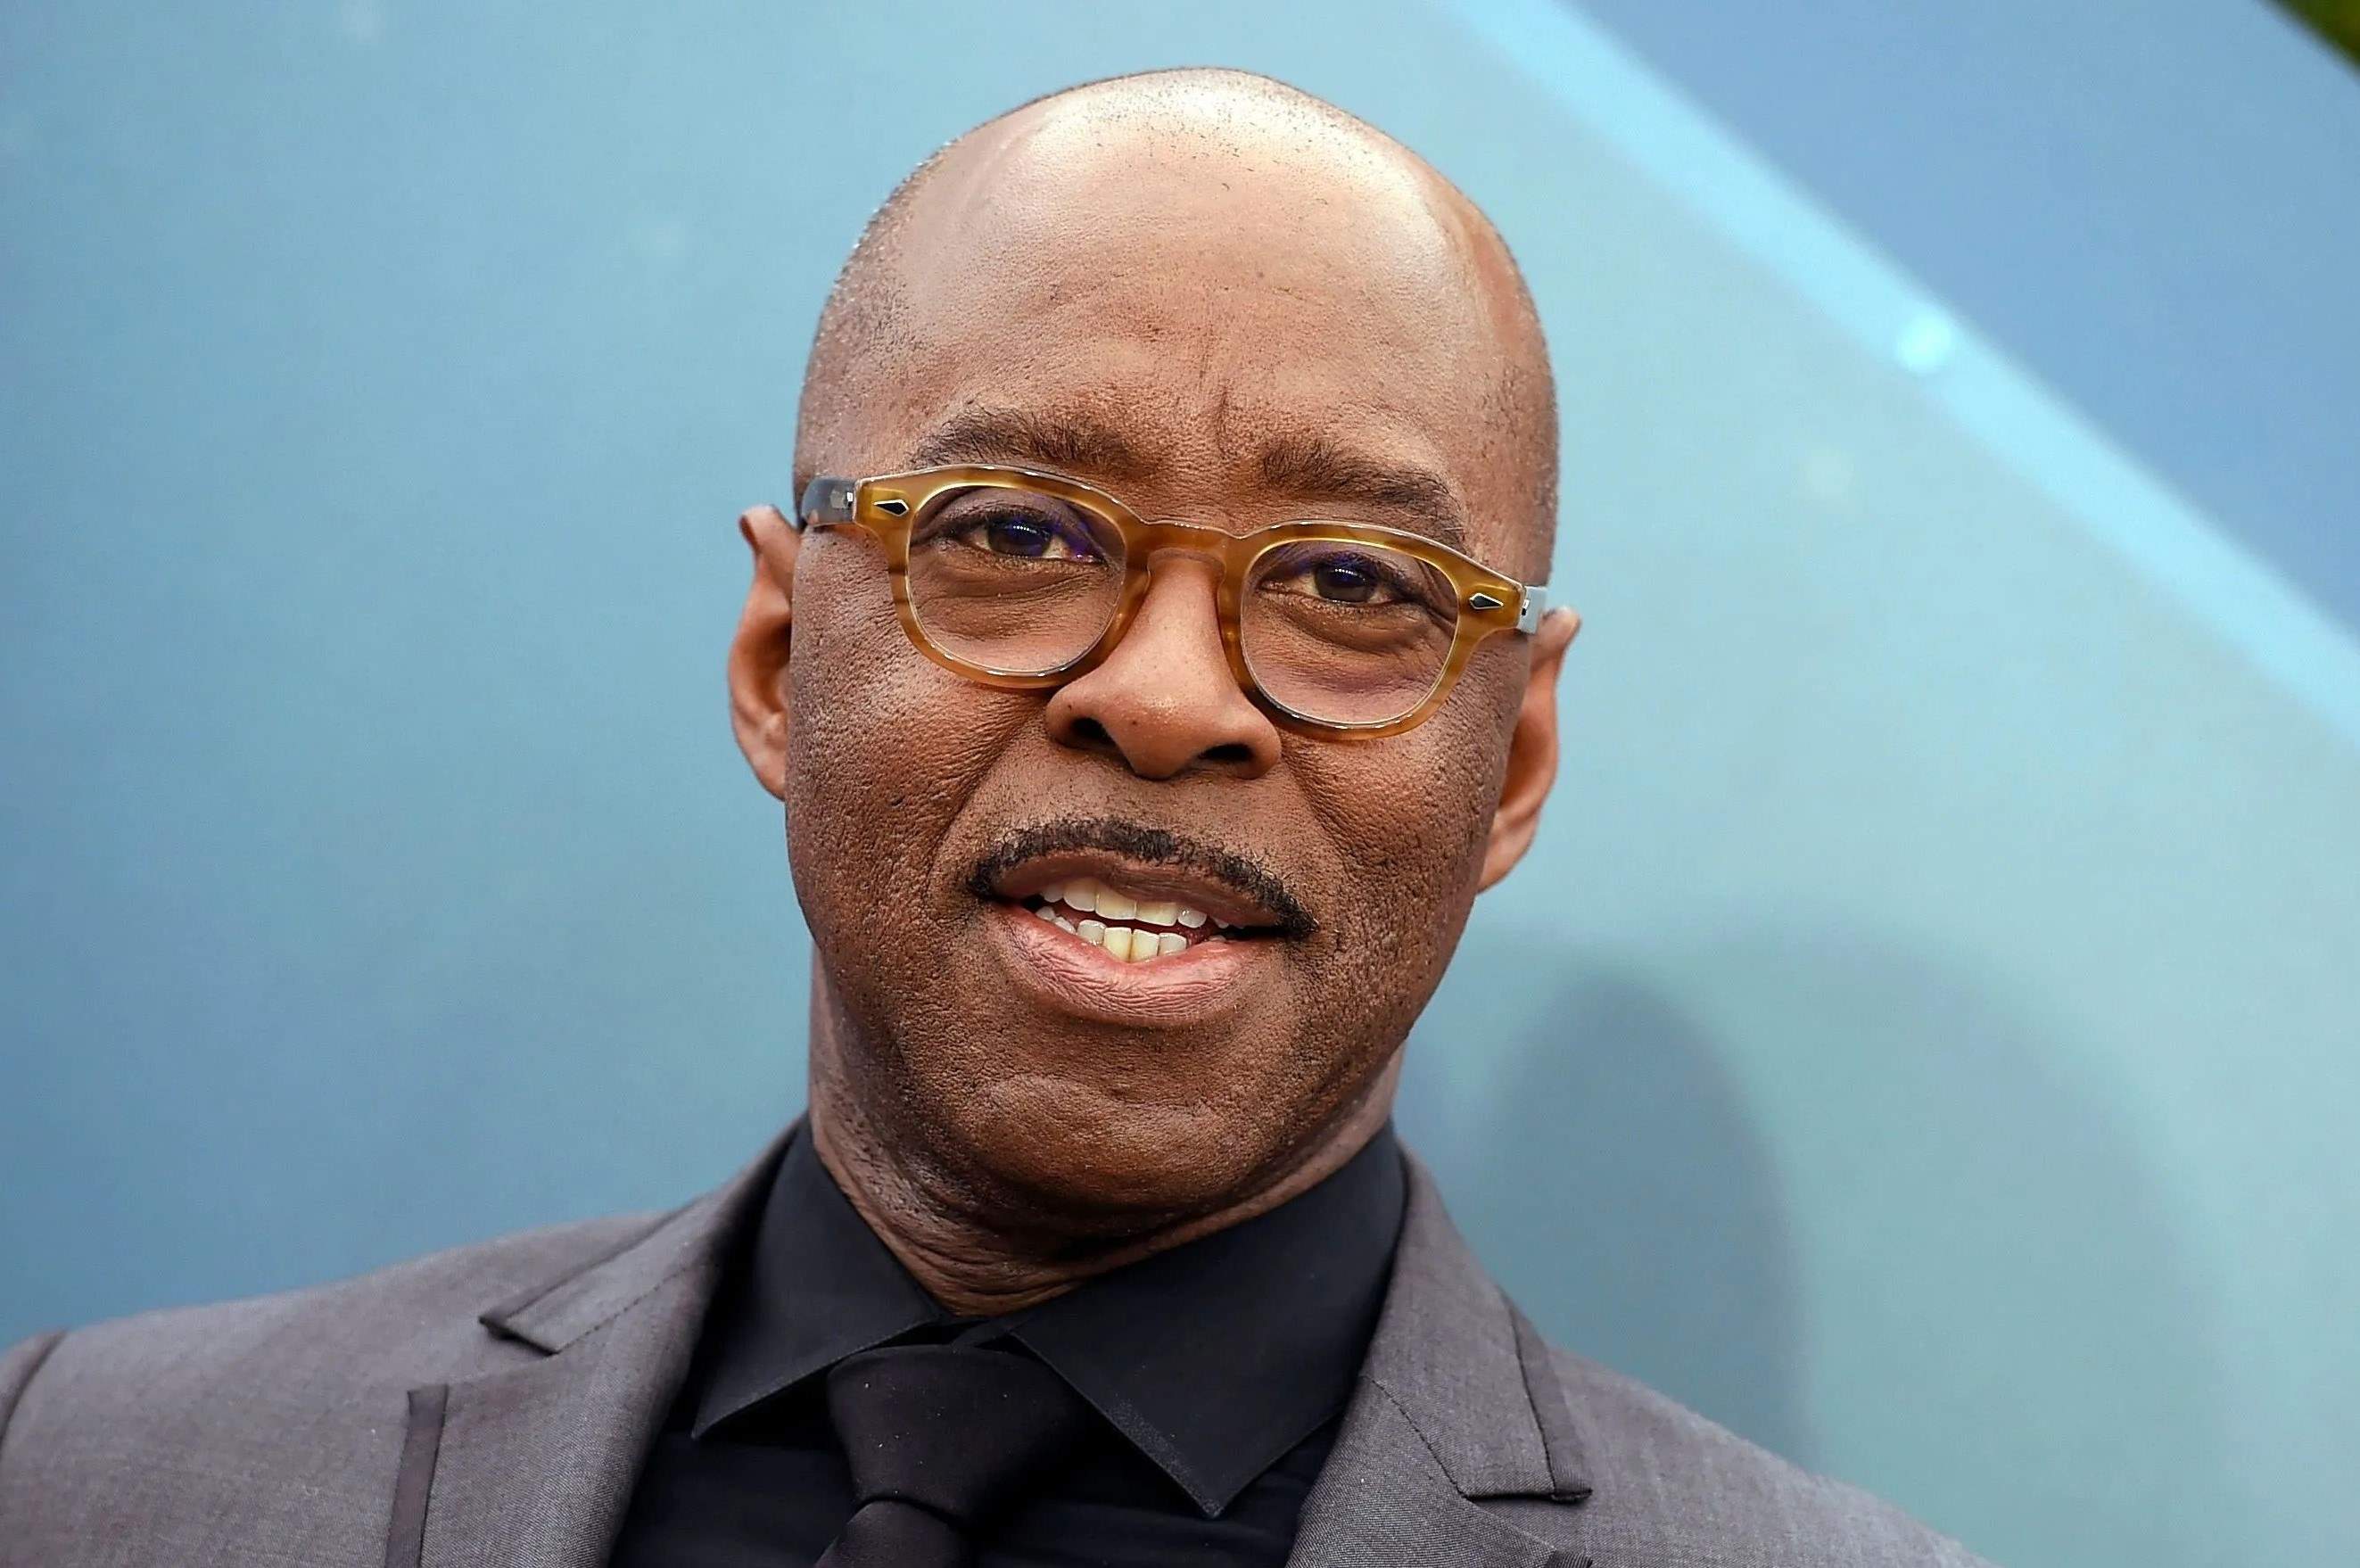 18 Fascinating Facts About Courtney B. Vance - Facts.net